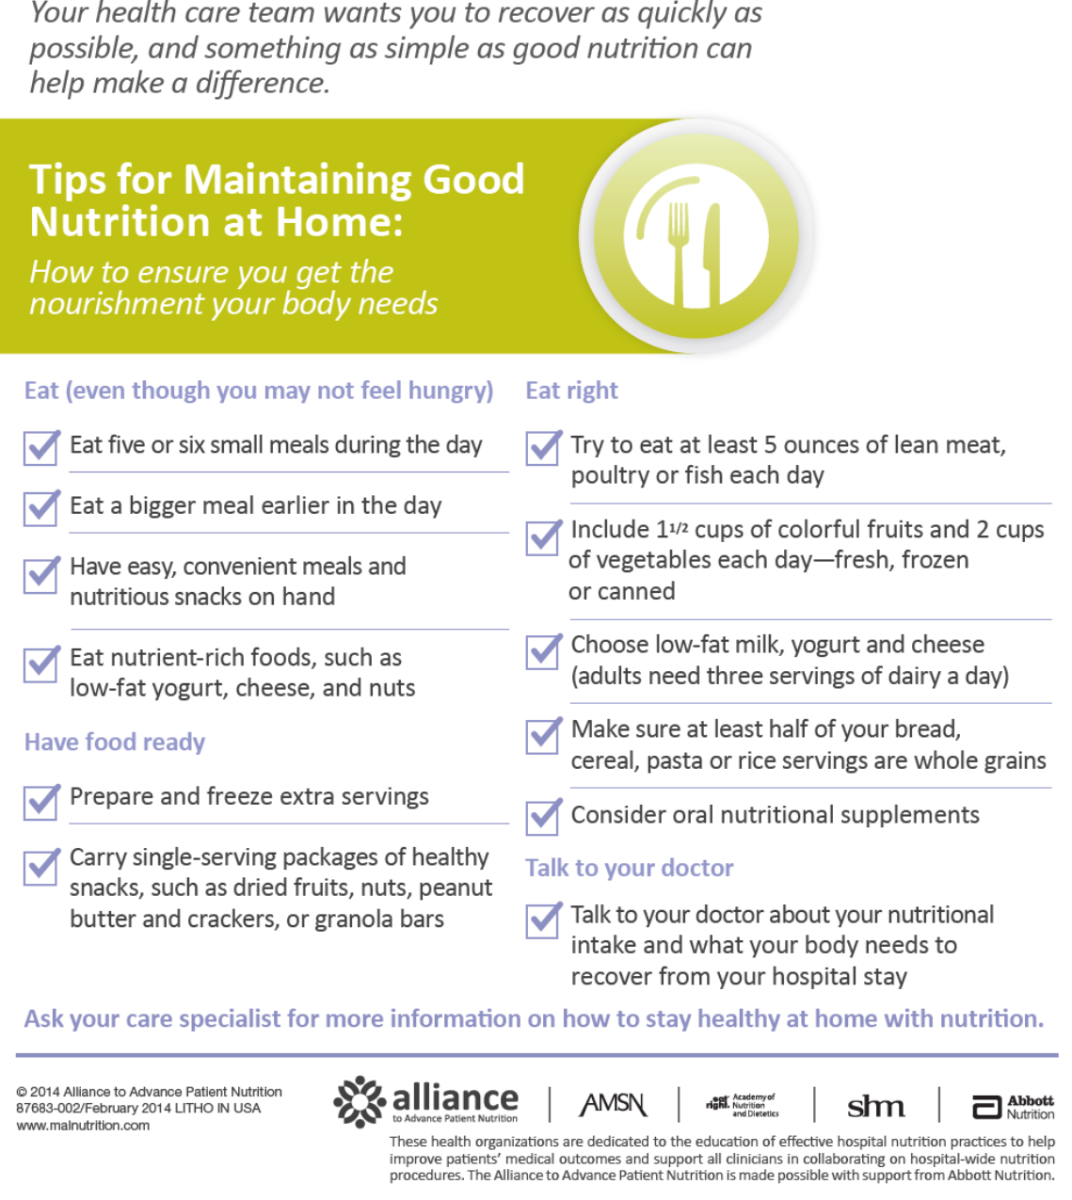 Tips for maintaining good nutrition at home